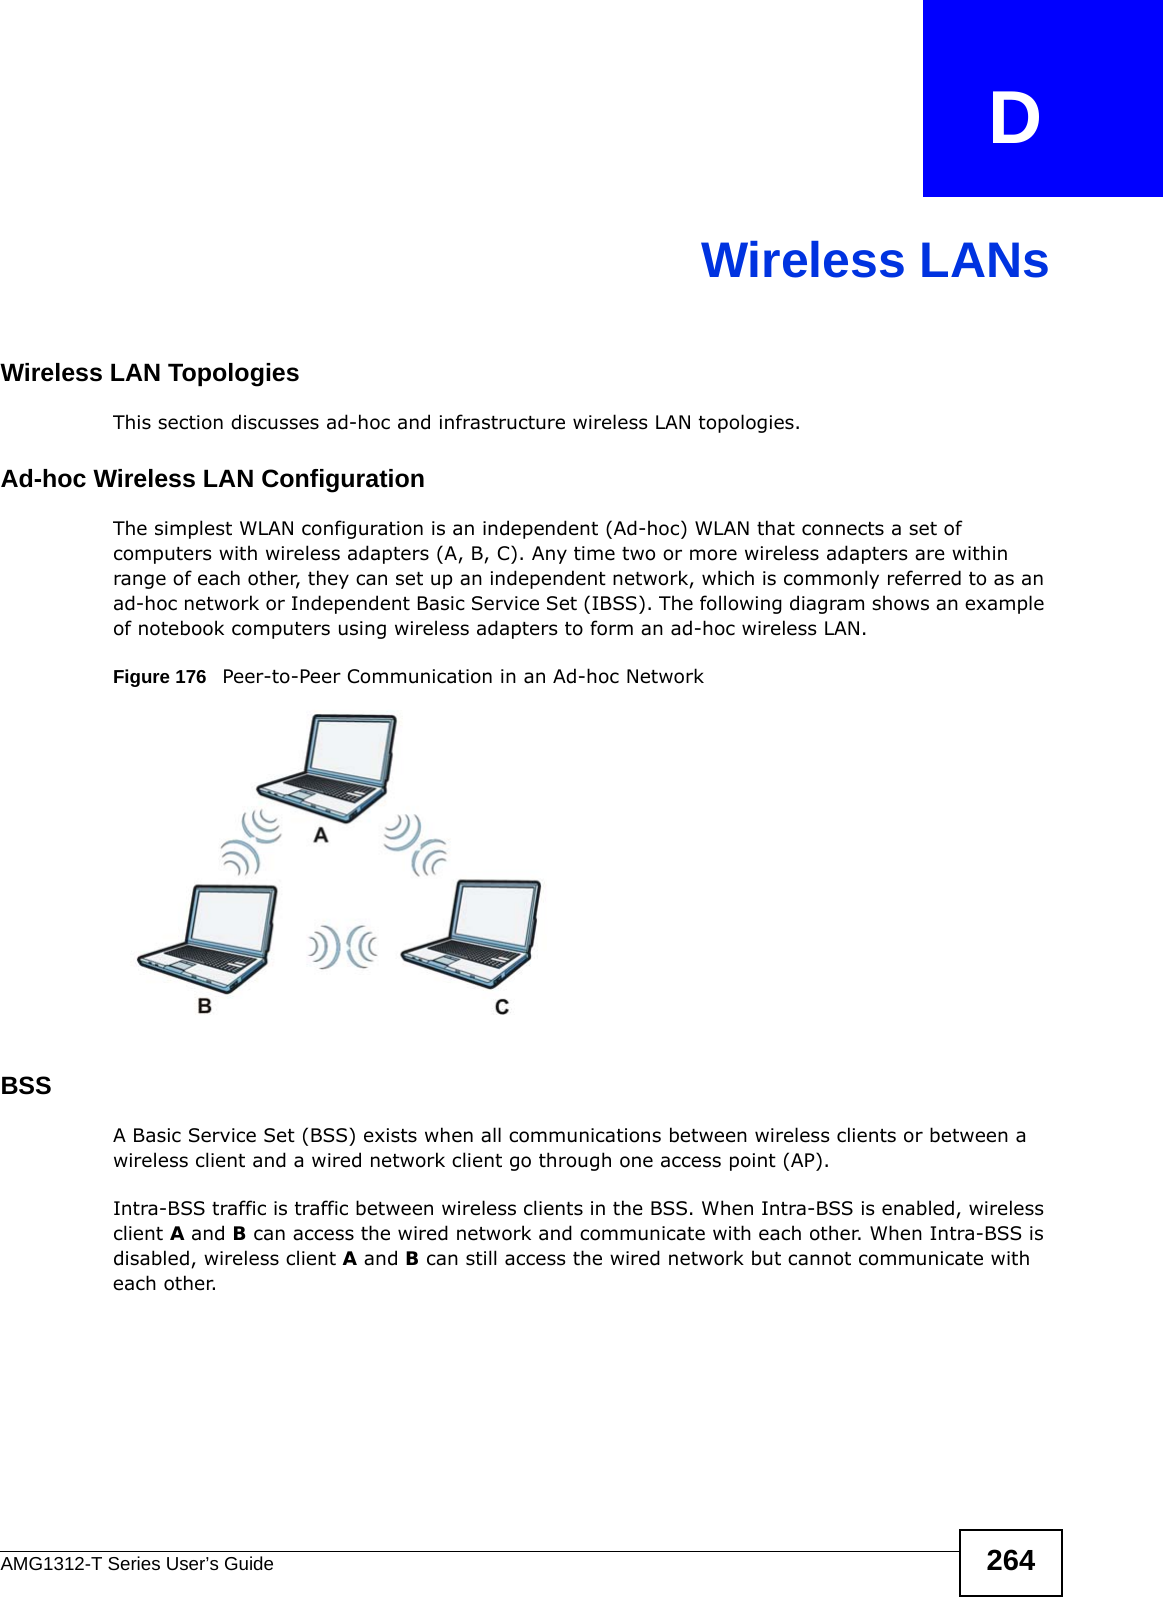 AMG1312-T Series User’s Guide 264APPENDIX   DWireless LANsWireless LAN TopologiesThis section discusses ad-hoc and infrastructure wireless LAN topologies.Ad-hoc Wireless LAN ConfigurationThe simplest WLAN configuration is an independent (Ad-hoc) WLAN that connects a set of computers with wireless adapters (A, B, C). Any time two or more wireless adapters are within range of each other, they can set up an independent network, which is commonly referred to as an ad-hoc network or Independent Basic Service Set (IBSS). The following diagram shows an example of notebook computers using wireless adapters to form an ad-hoc wireless LAN. Figure 176   Peer-to-Peer Communication in an Ad-hoc NetworkBSSA Basic Service Set (BSS) exists when all communications between wireless clients or between a wireless client and a wired network client go through one access point (AP). Intra-BSS traffic is traffic between wireless clients in the BSS. When Intra-BSS is enabled, wireless client A and B can access the wired network and communicate with each other. When Intra-BSS is disabled, wireless client A and B can still access the wired network but cannot communicate with each other.